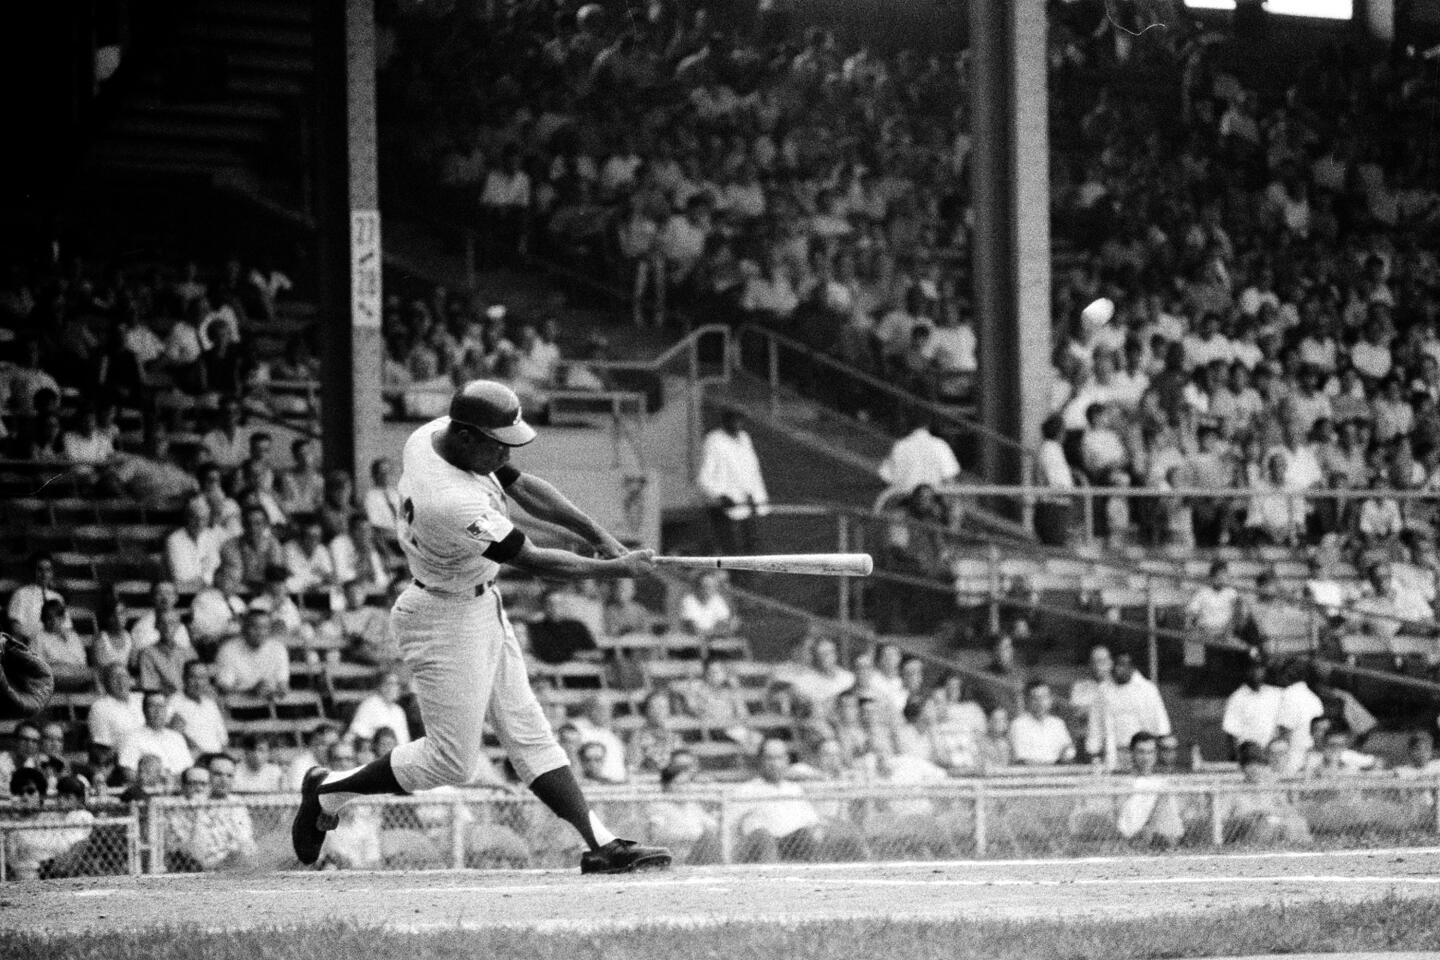 When Hank Aaron Topped Babe Ruth's Hallowed Home Run Mark